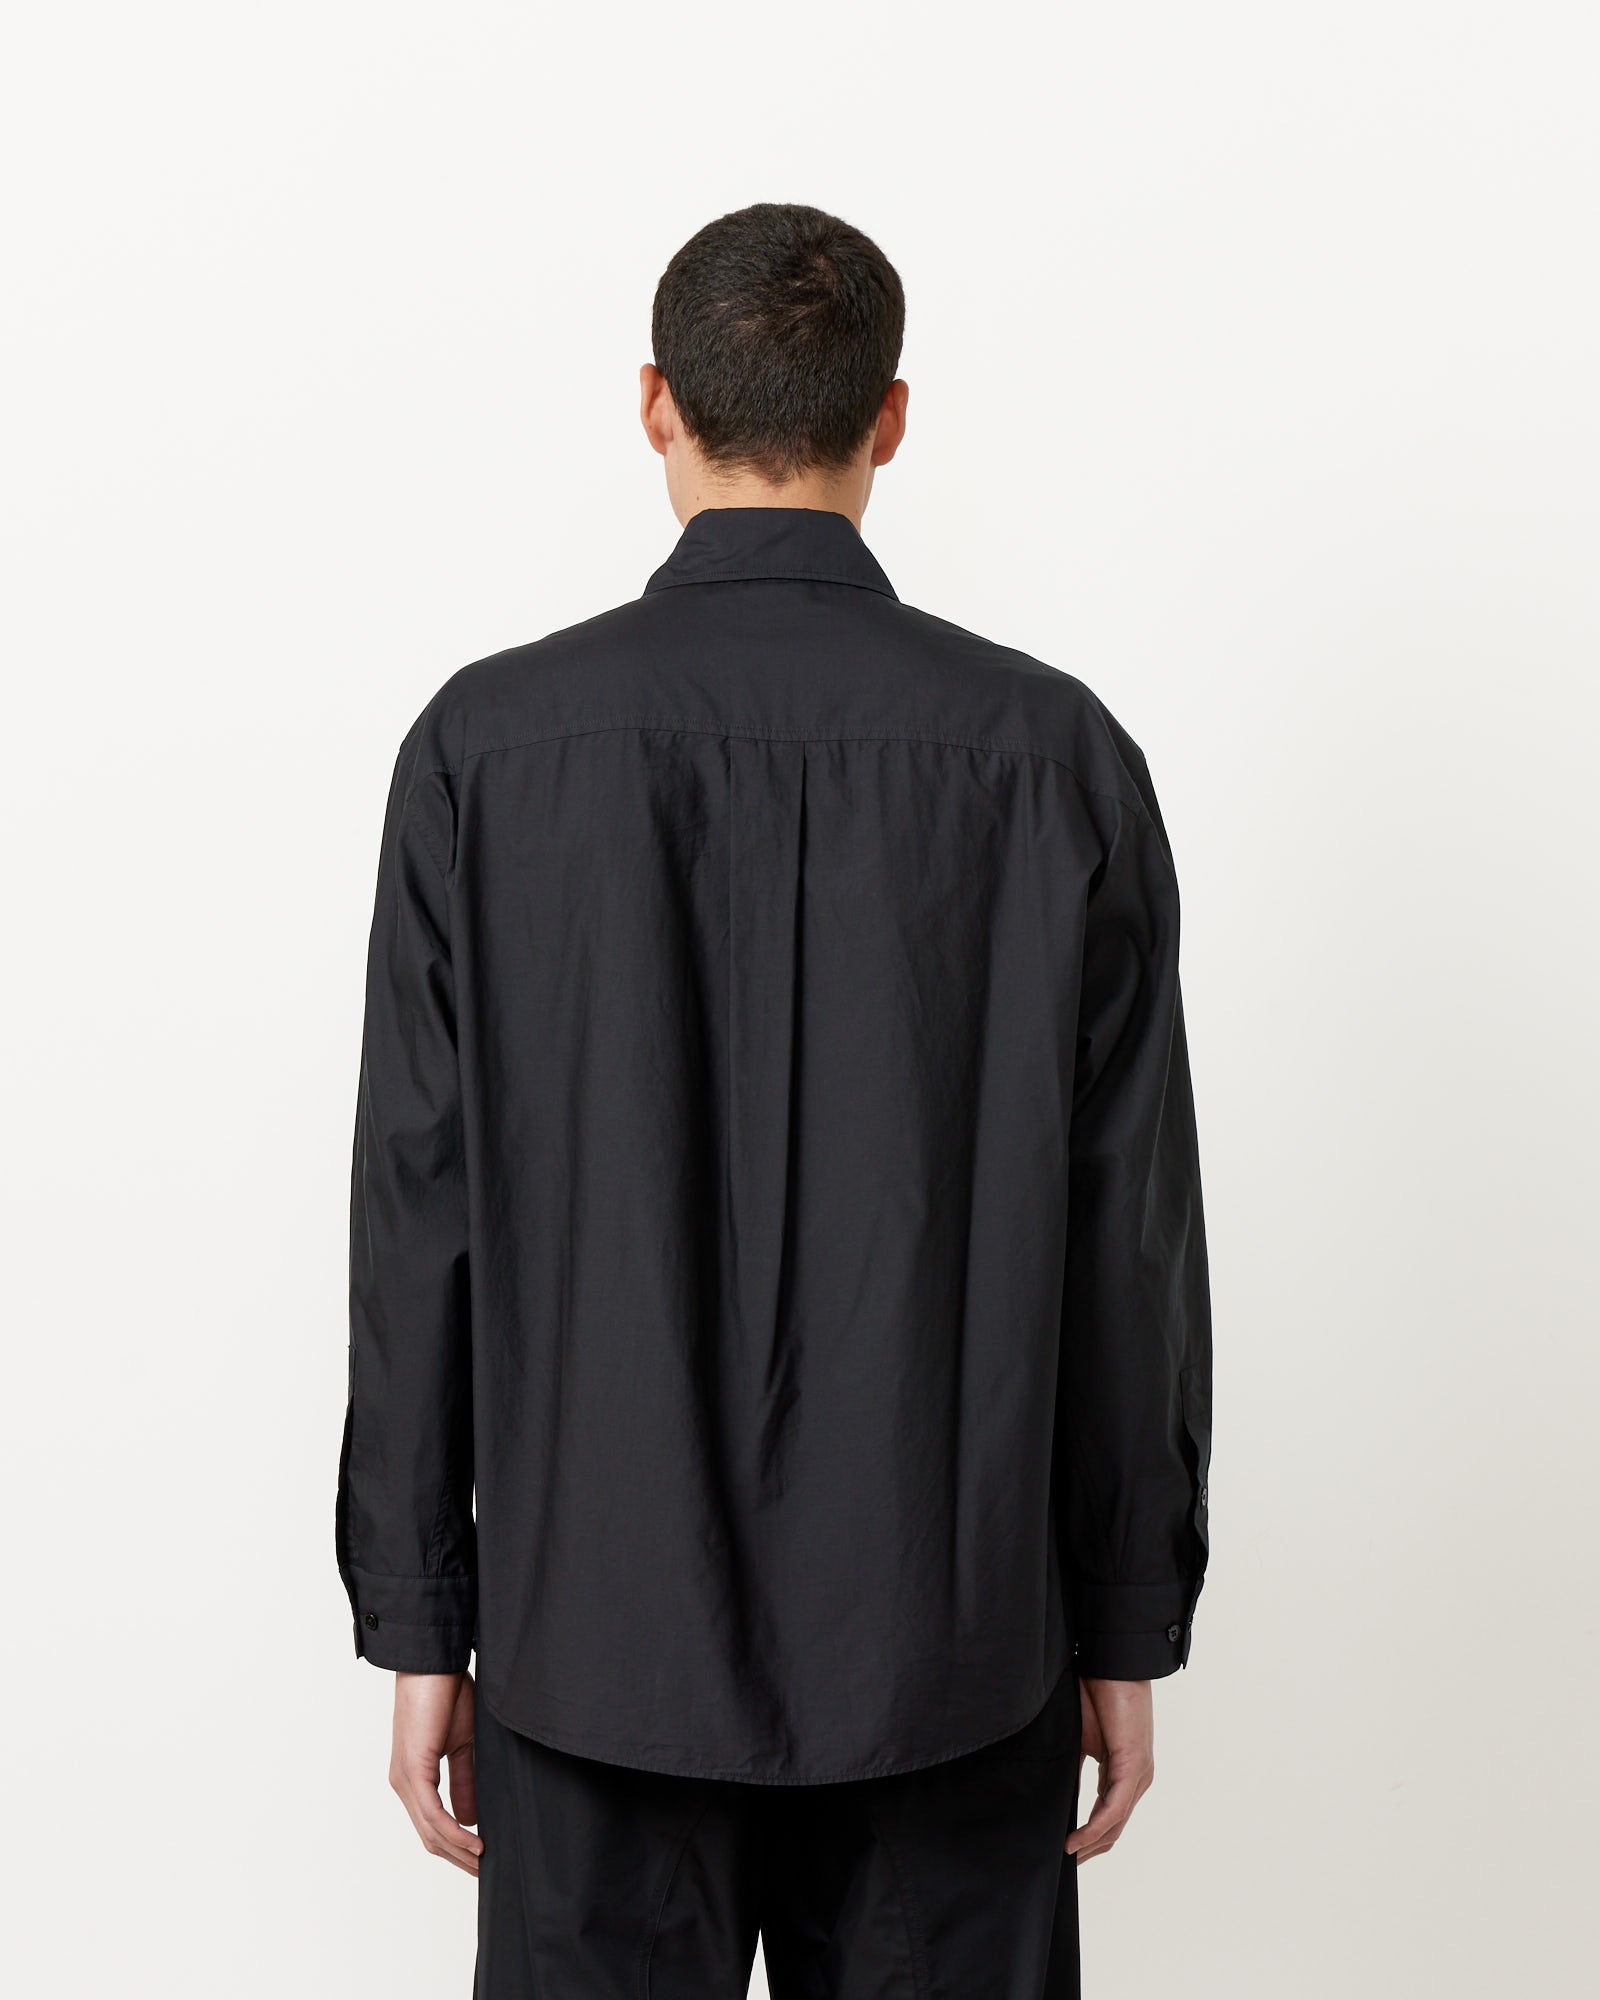 Double Pocket Shirt in Black